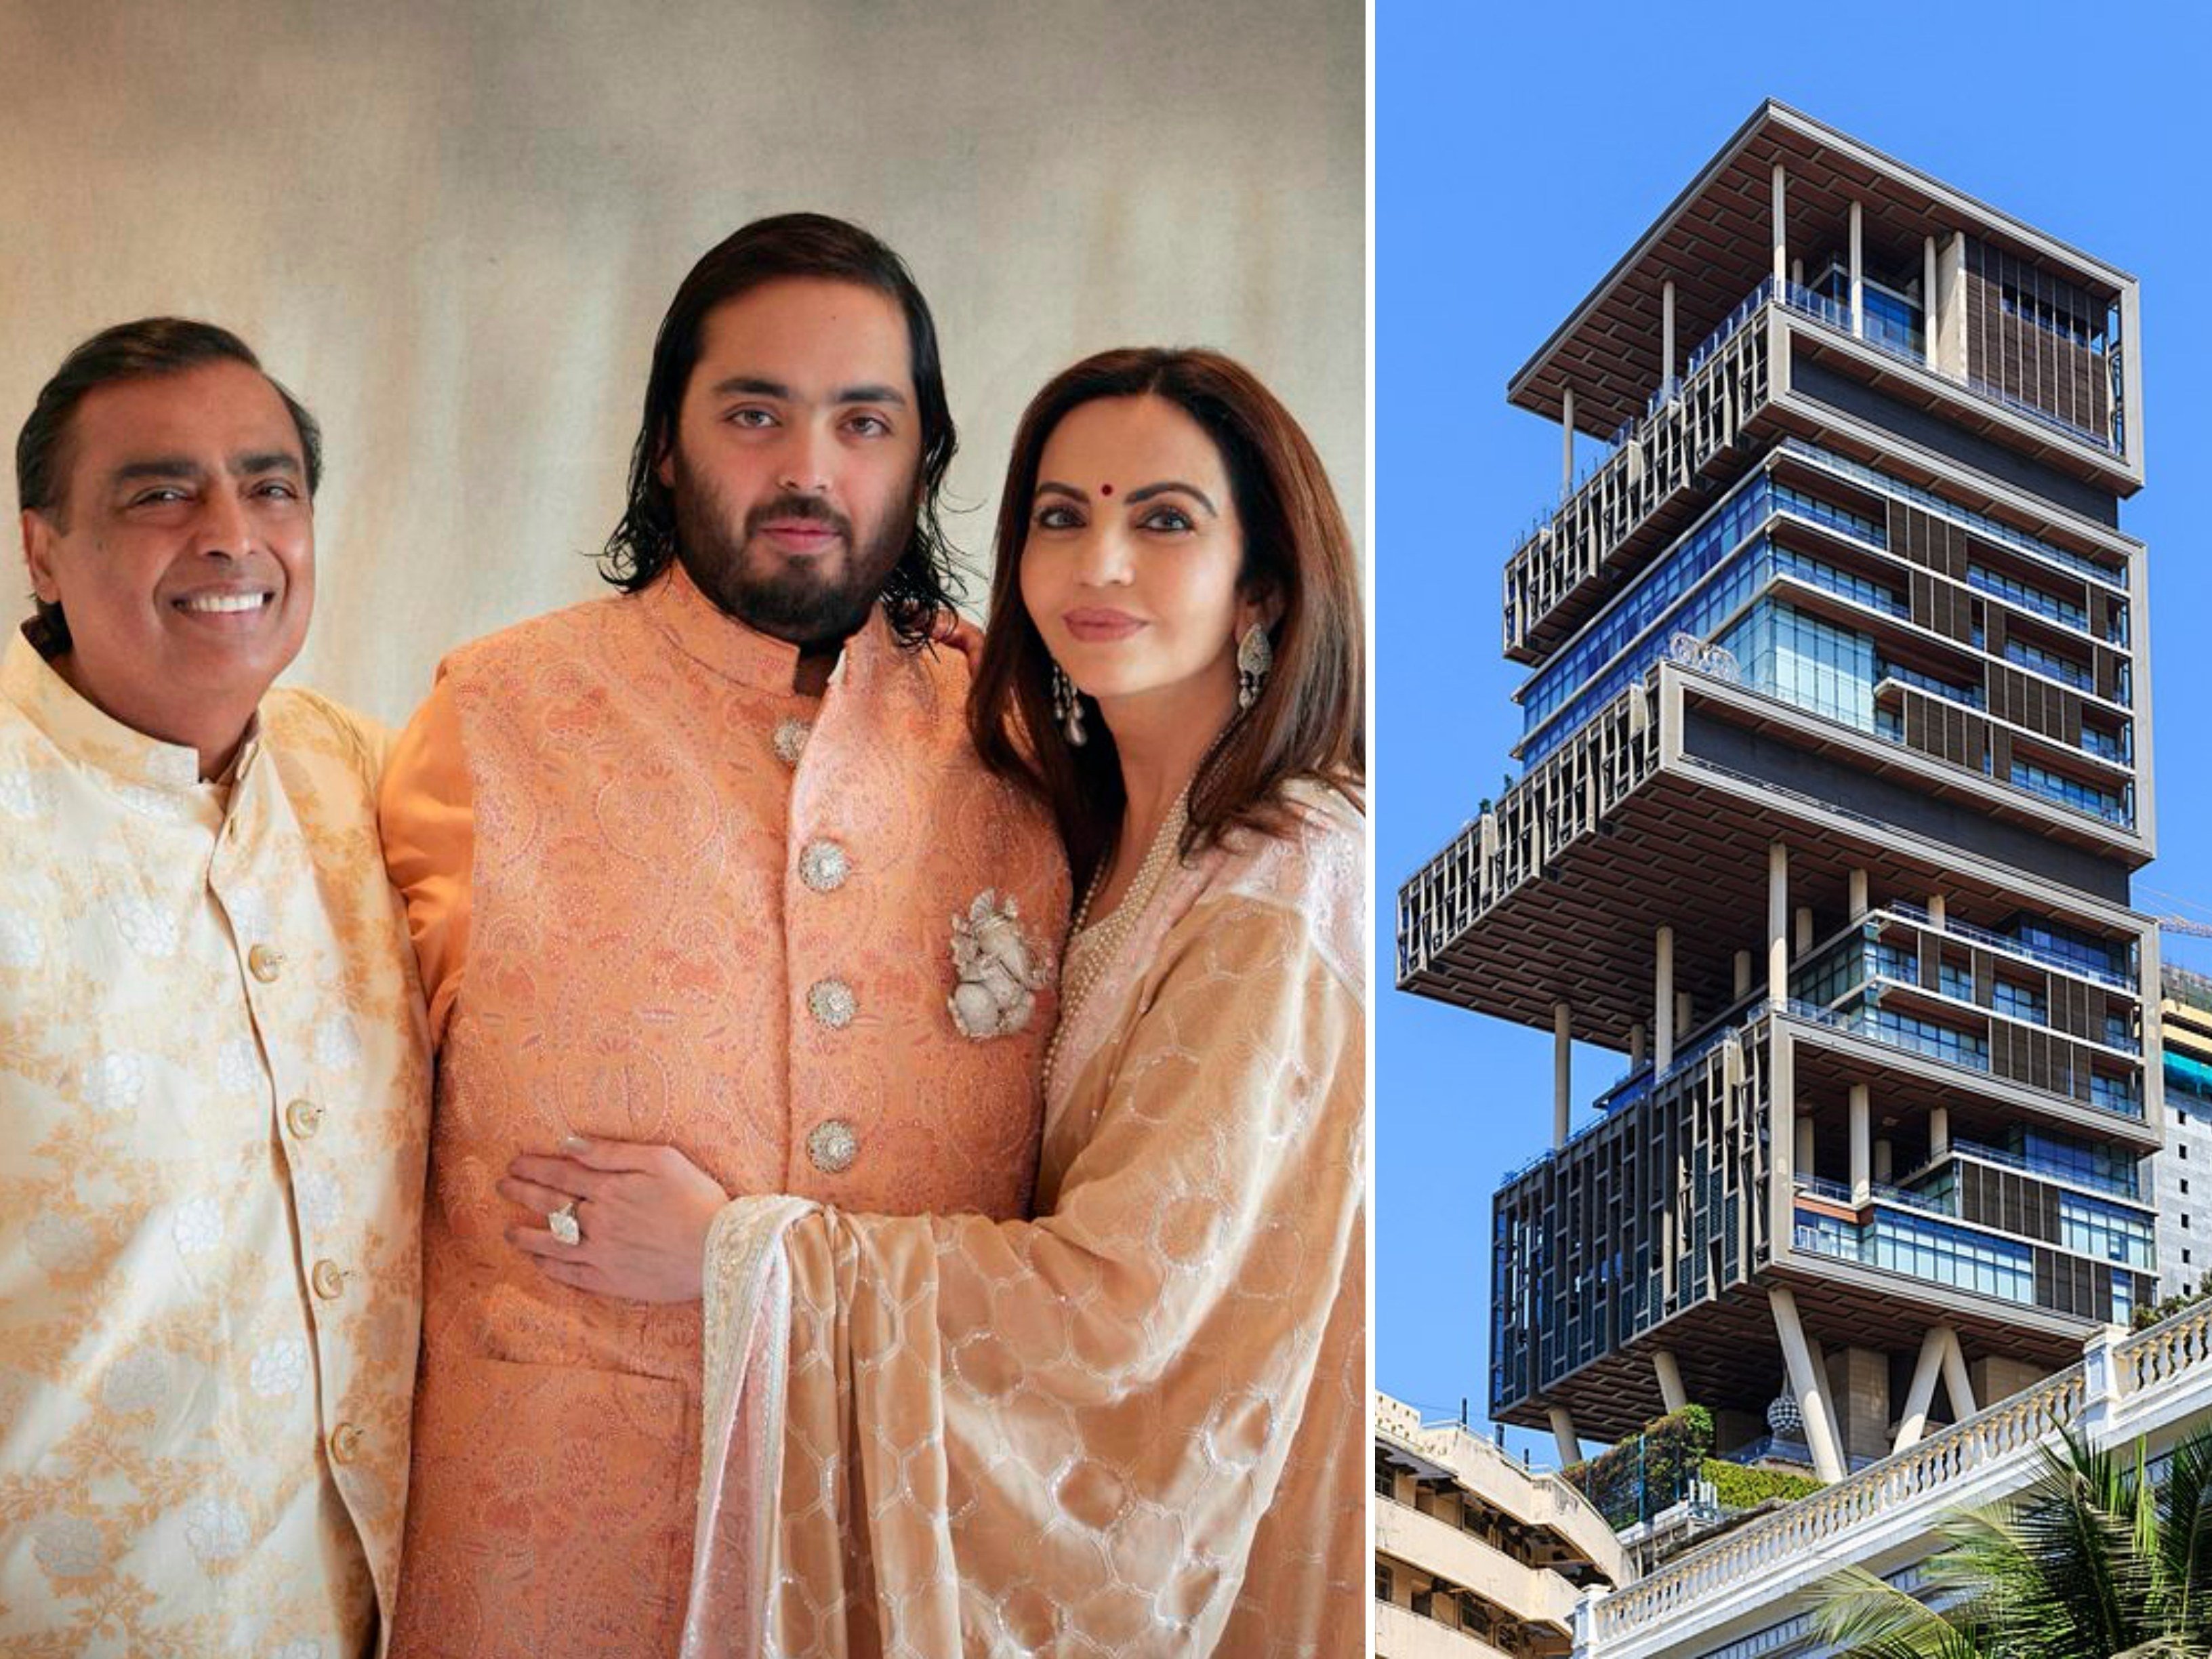 Ambani family members – Mukesh, his wife Nita and son Anant are pictured on the right – live in their Antilia mansion in Mumbai. Photo: AP, Wiki Commons